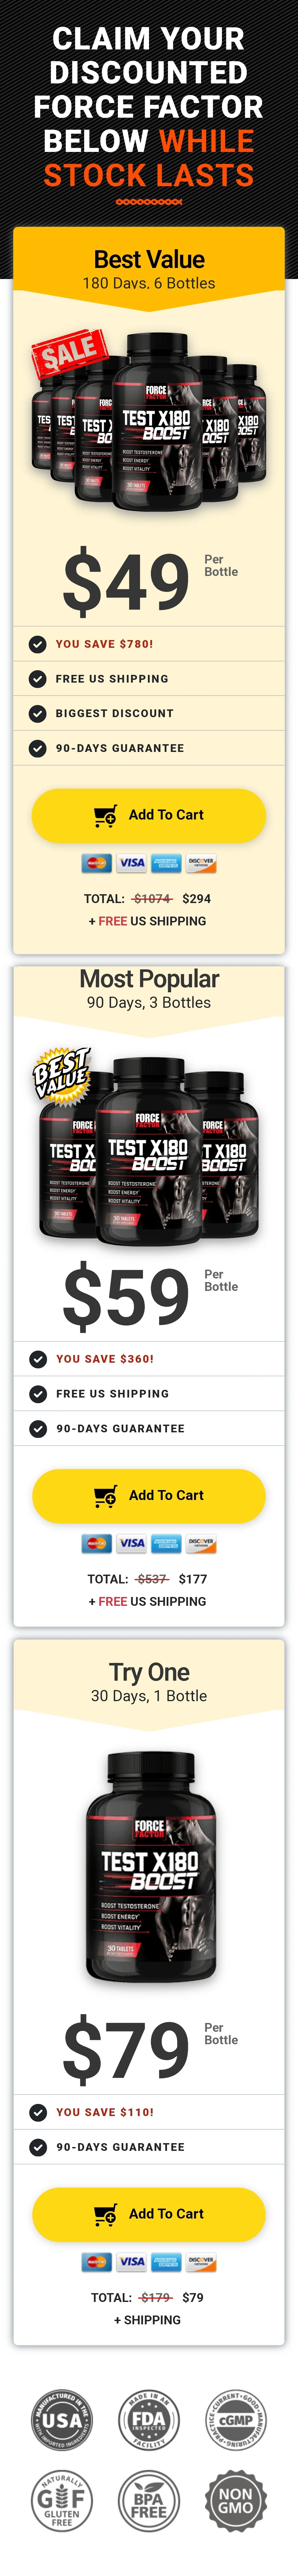 Force Factor Test X180 Boost Pricing